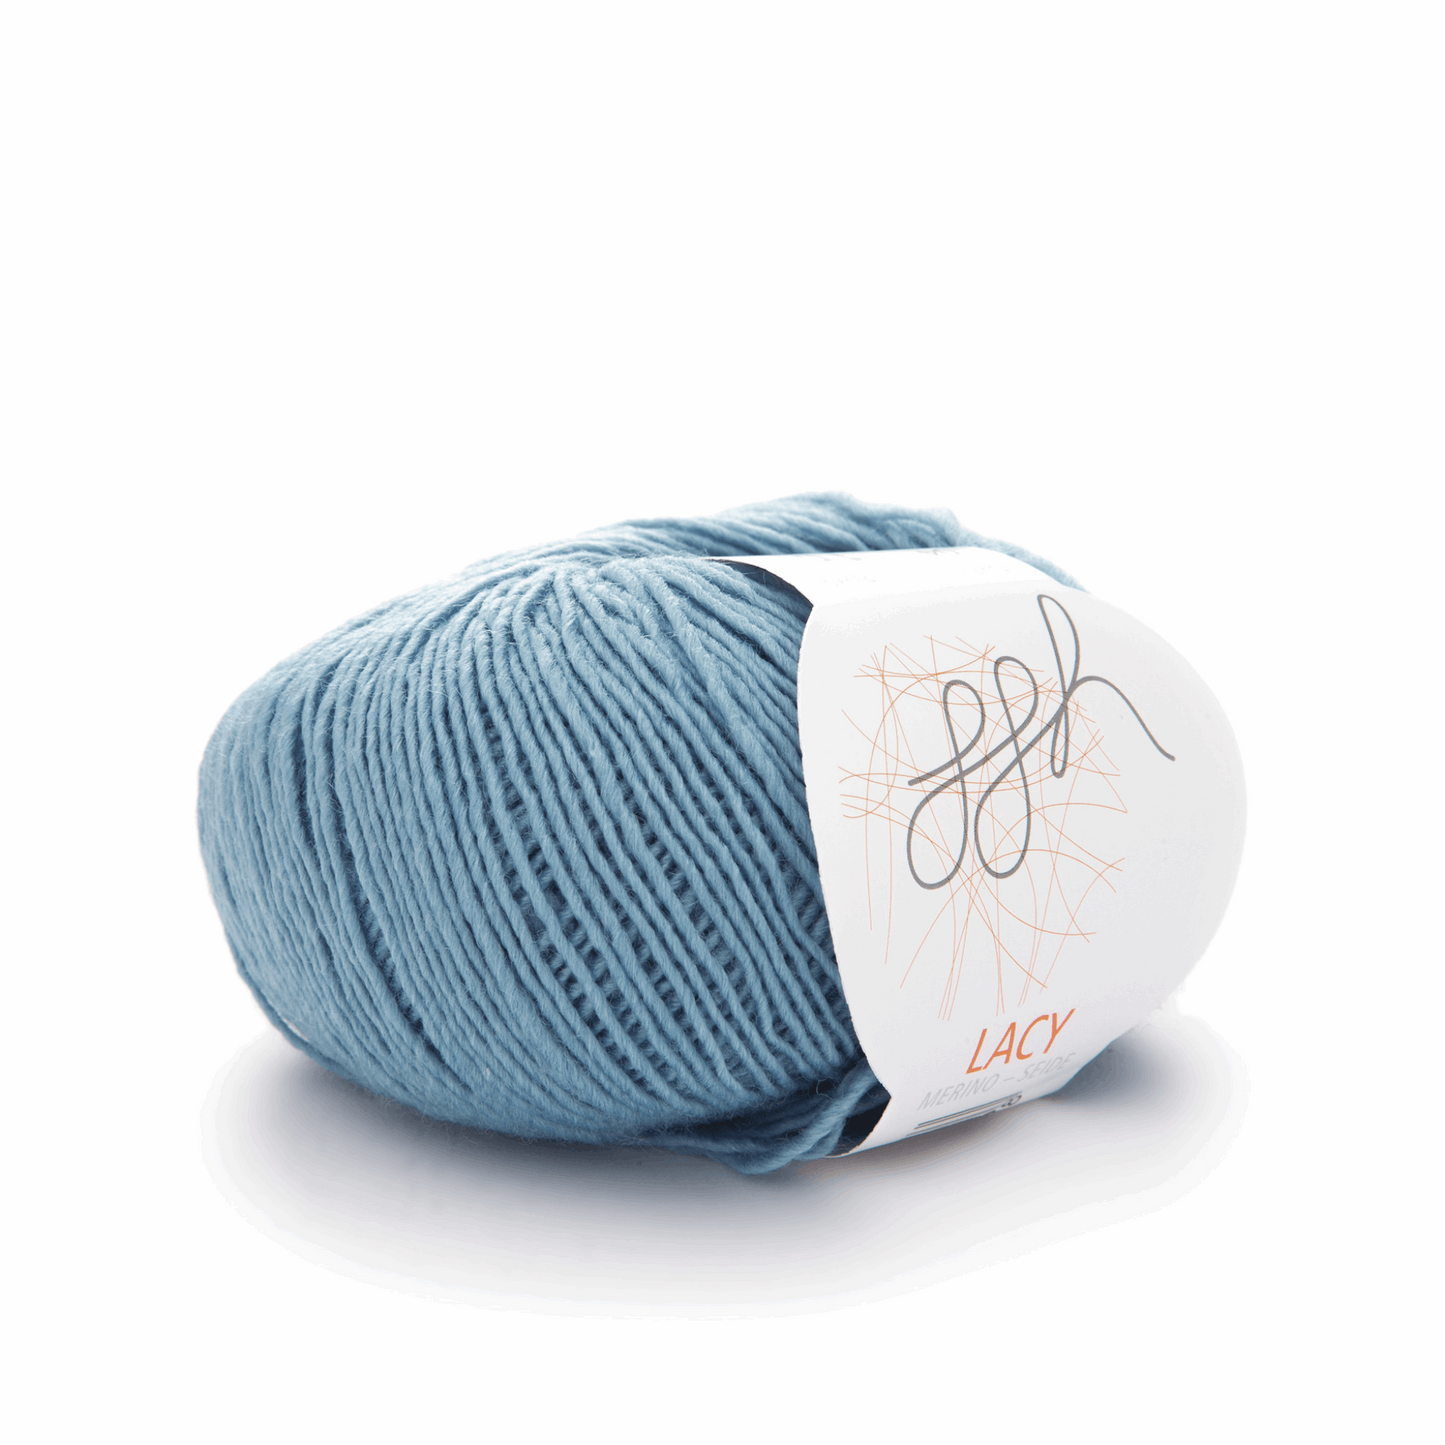 ggh Lacy 25g, ice blue, 96016, color 4